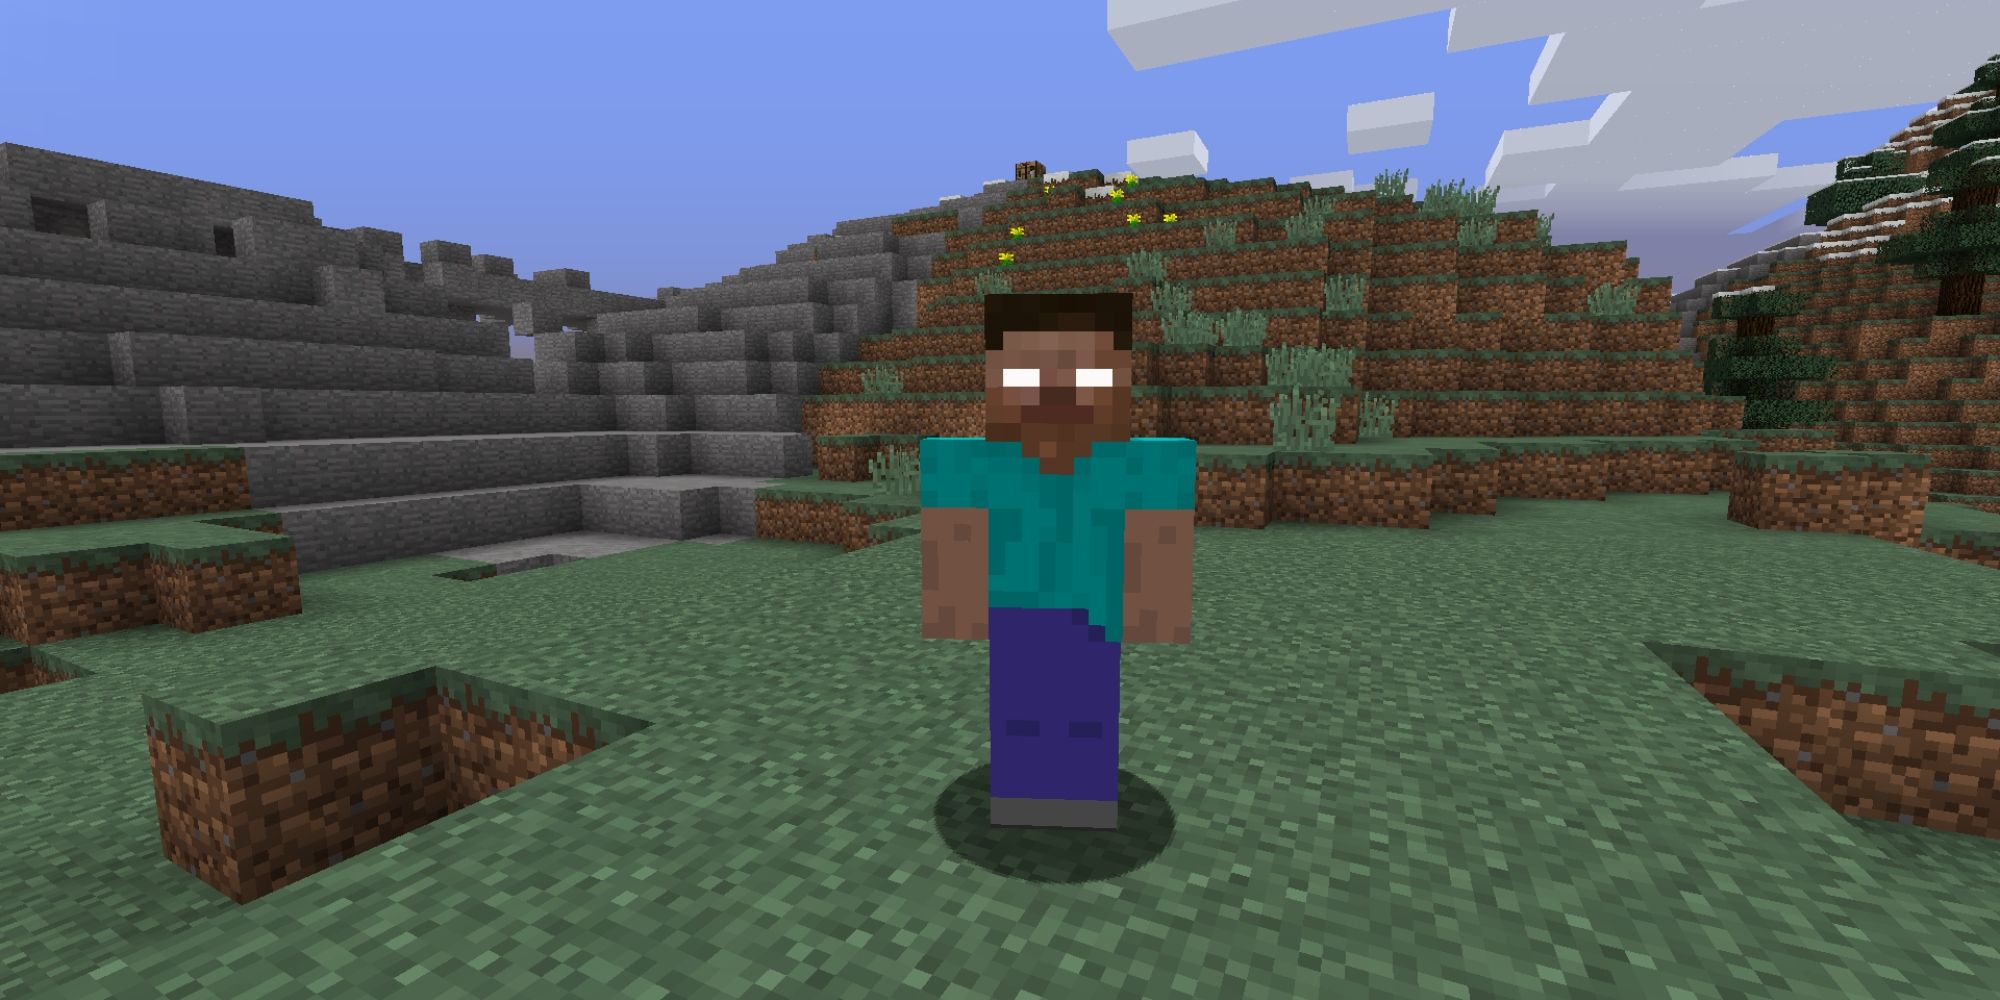 Herobrine standing in the middle of hills in Minecraft.